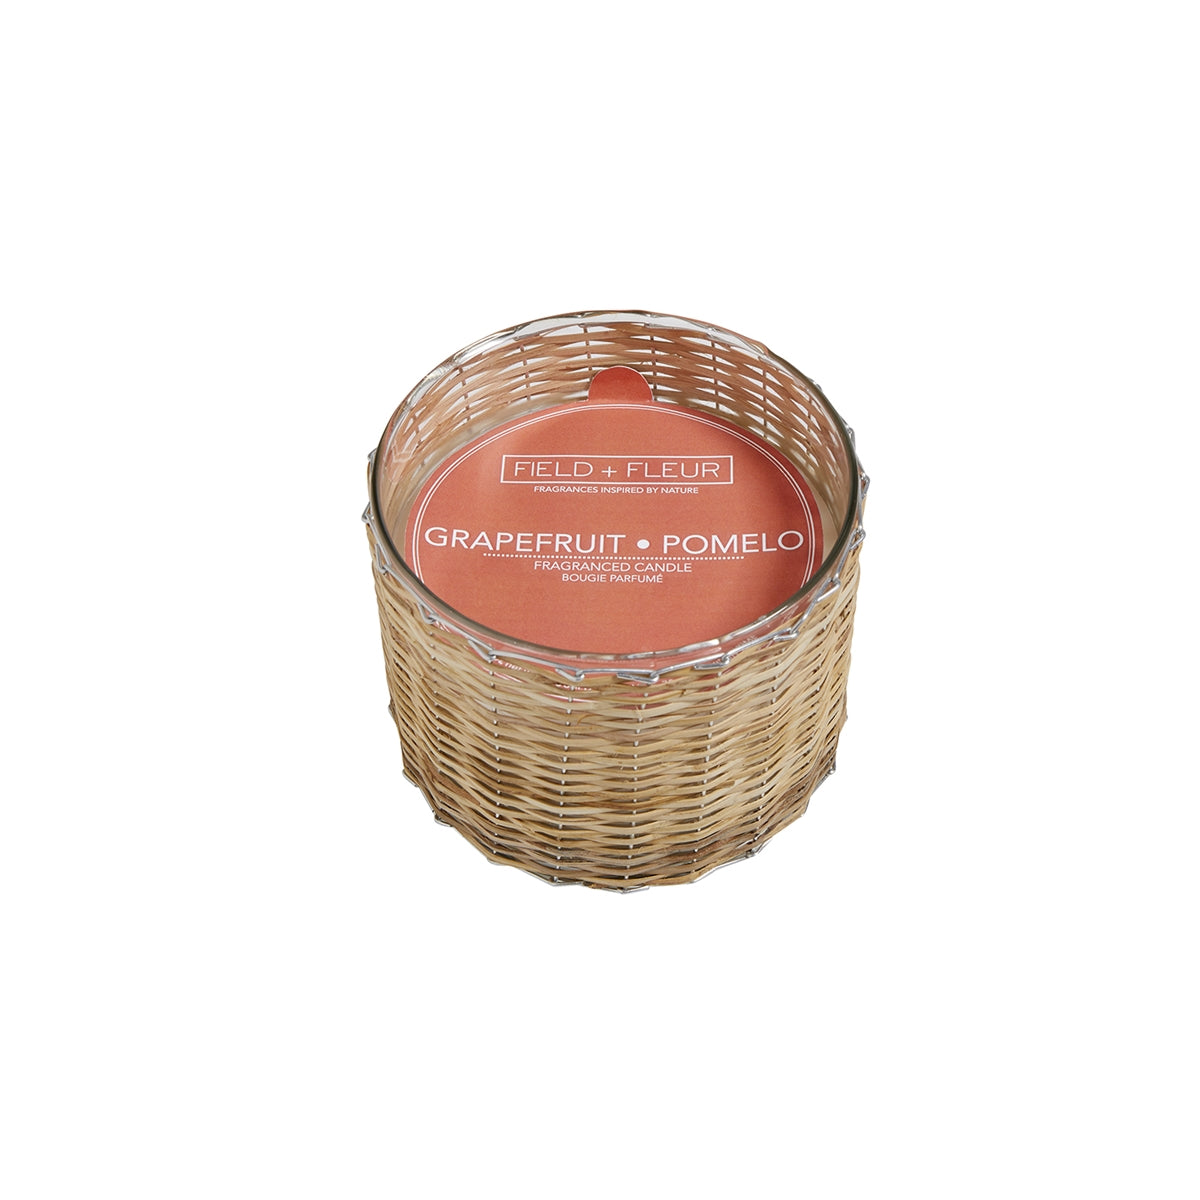 GRAPEFRUIT POMELO Field + Fleur Reed 3-Wick Handwoven 21 oz Scented Jar Candle